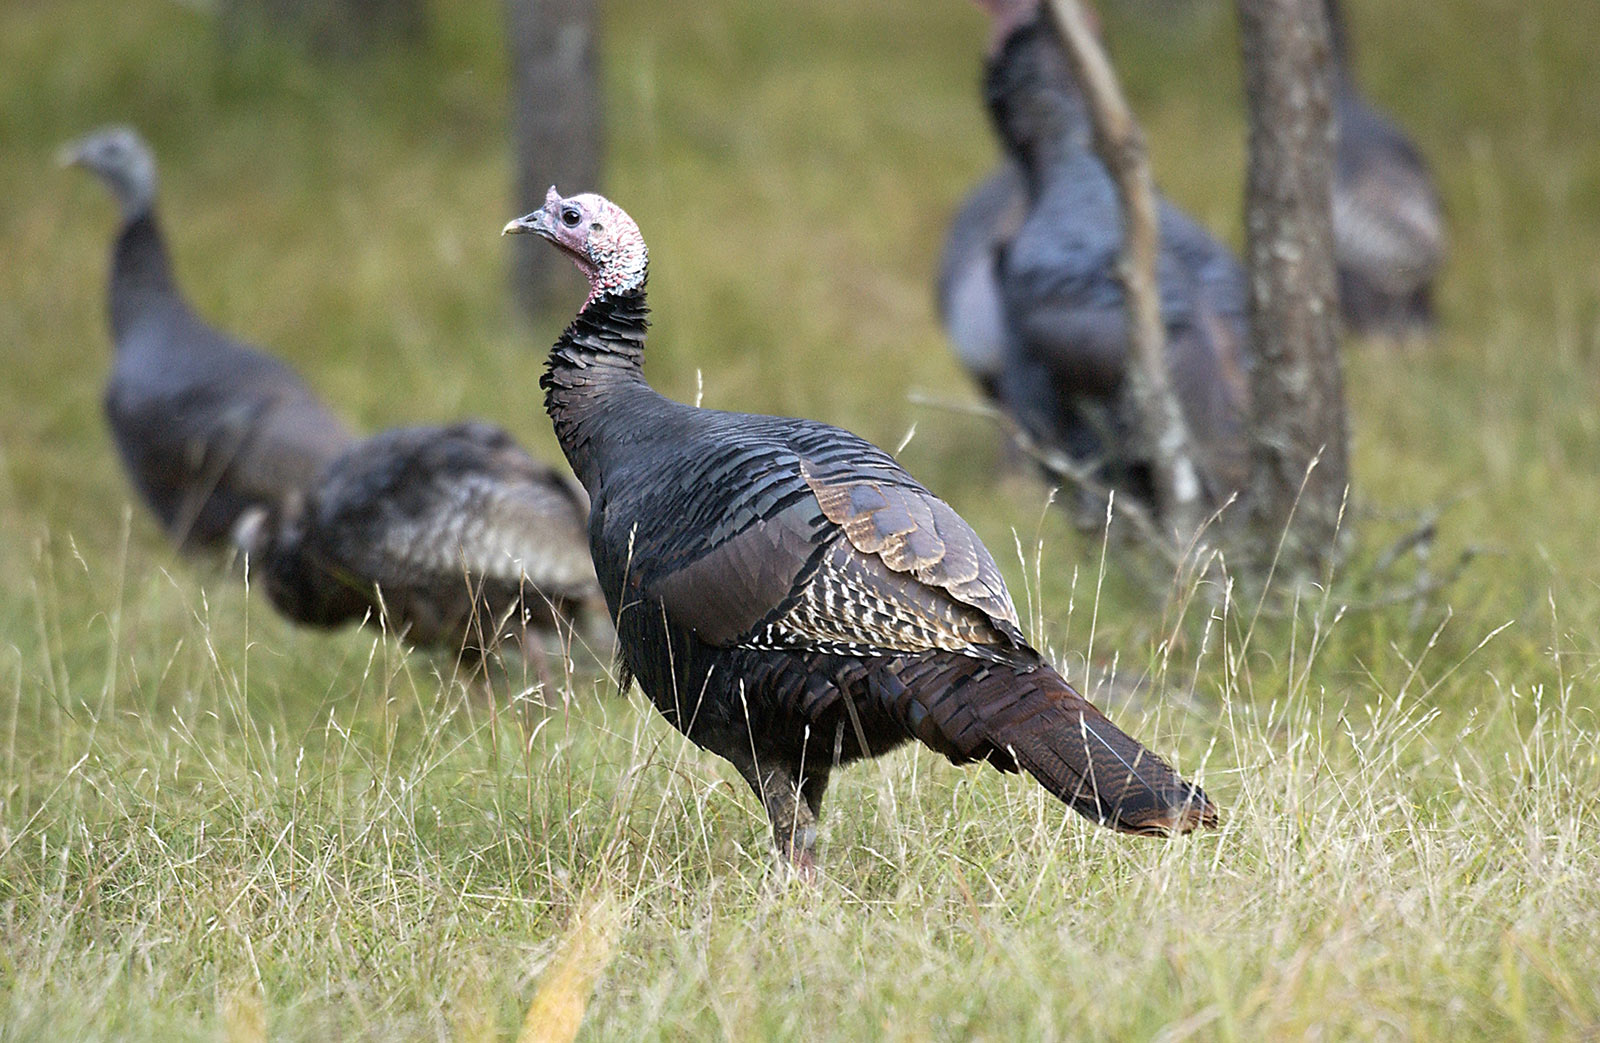 Celebrate Thanksgiving with a turkey conservation lesson